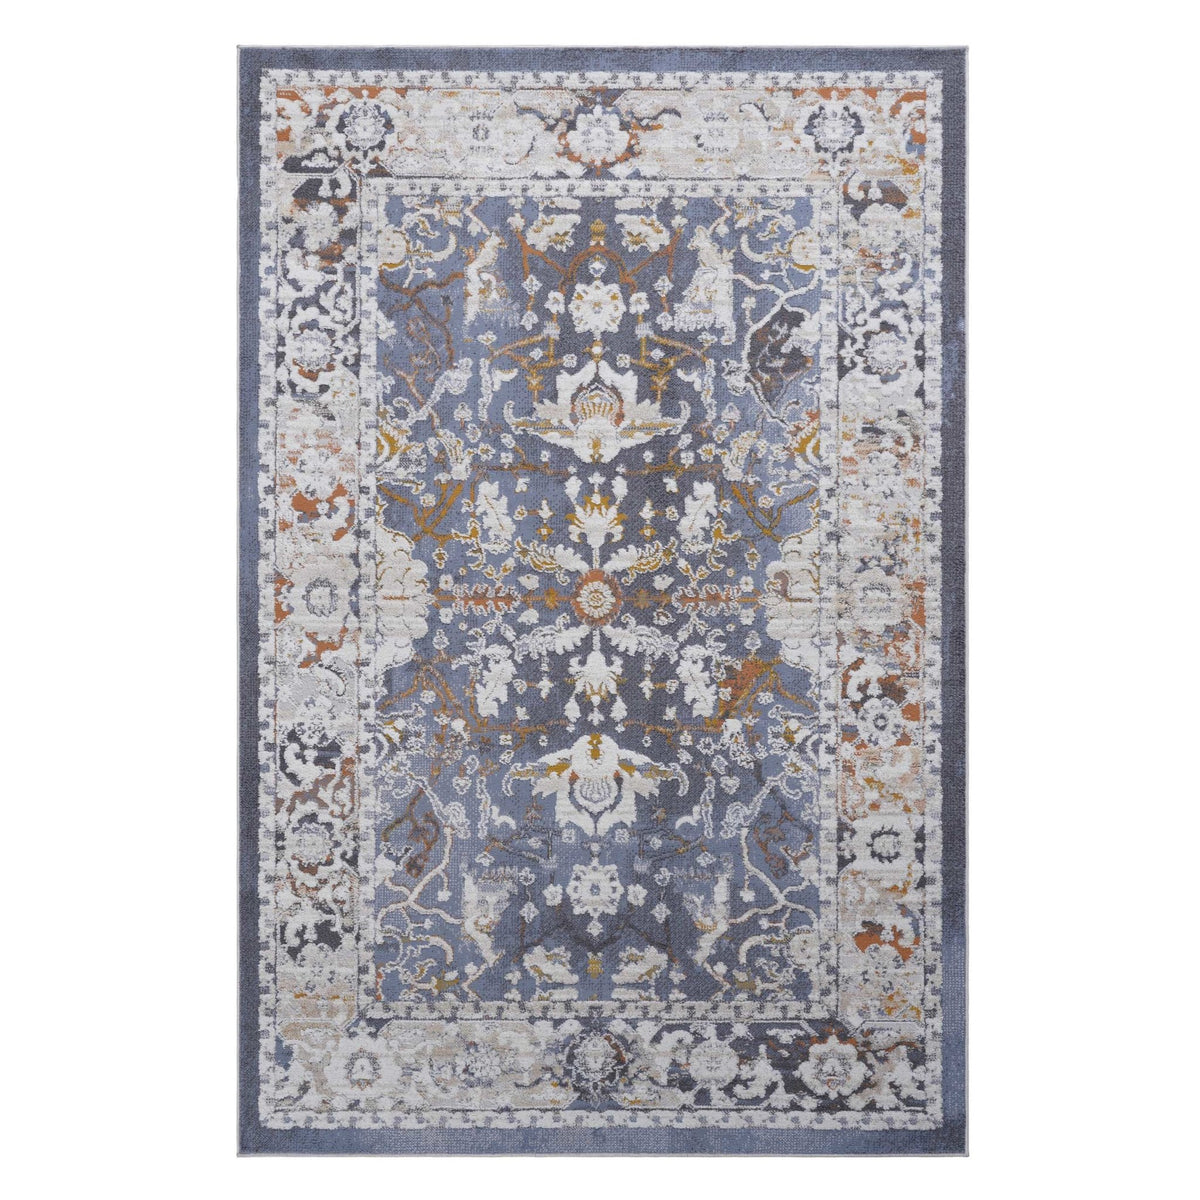 Payas Blue Rug Size 5'3'' x 7'6'' | Mid in Mod | Houston TX | Best Furniture stores in Houston